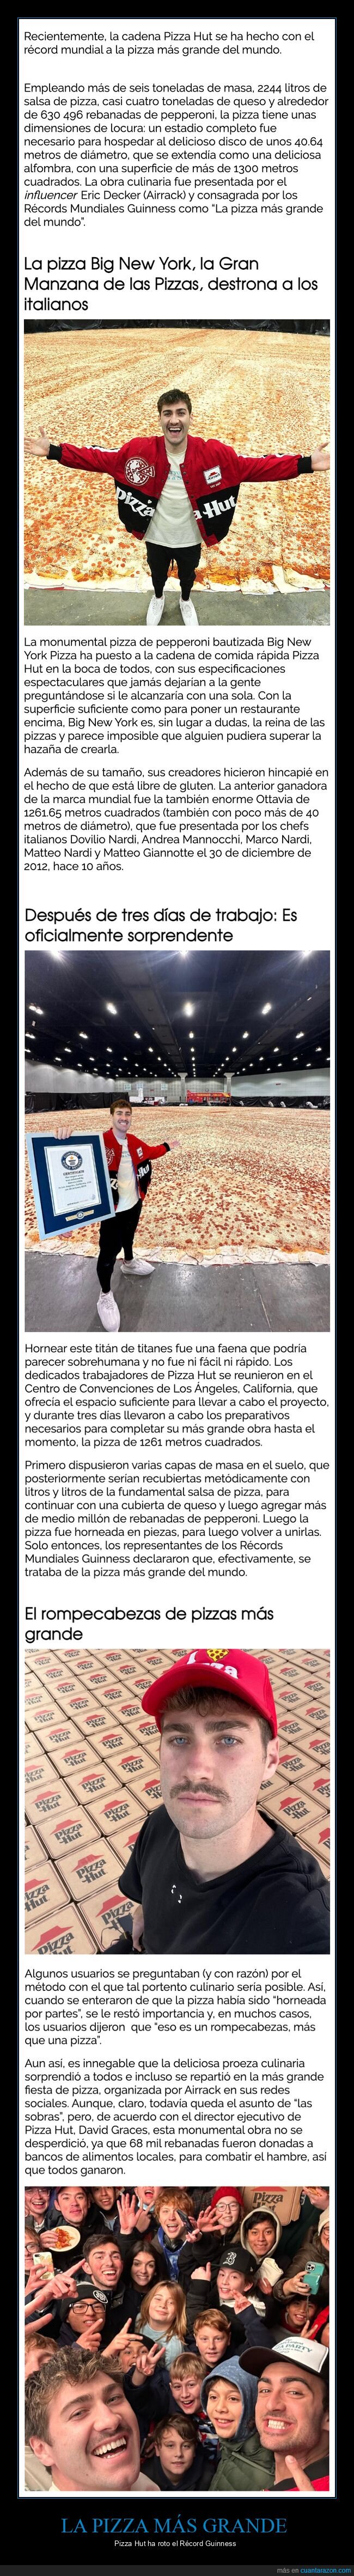 pizza,gigante,récord guinness